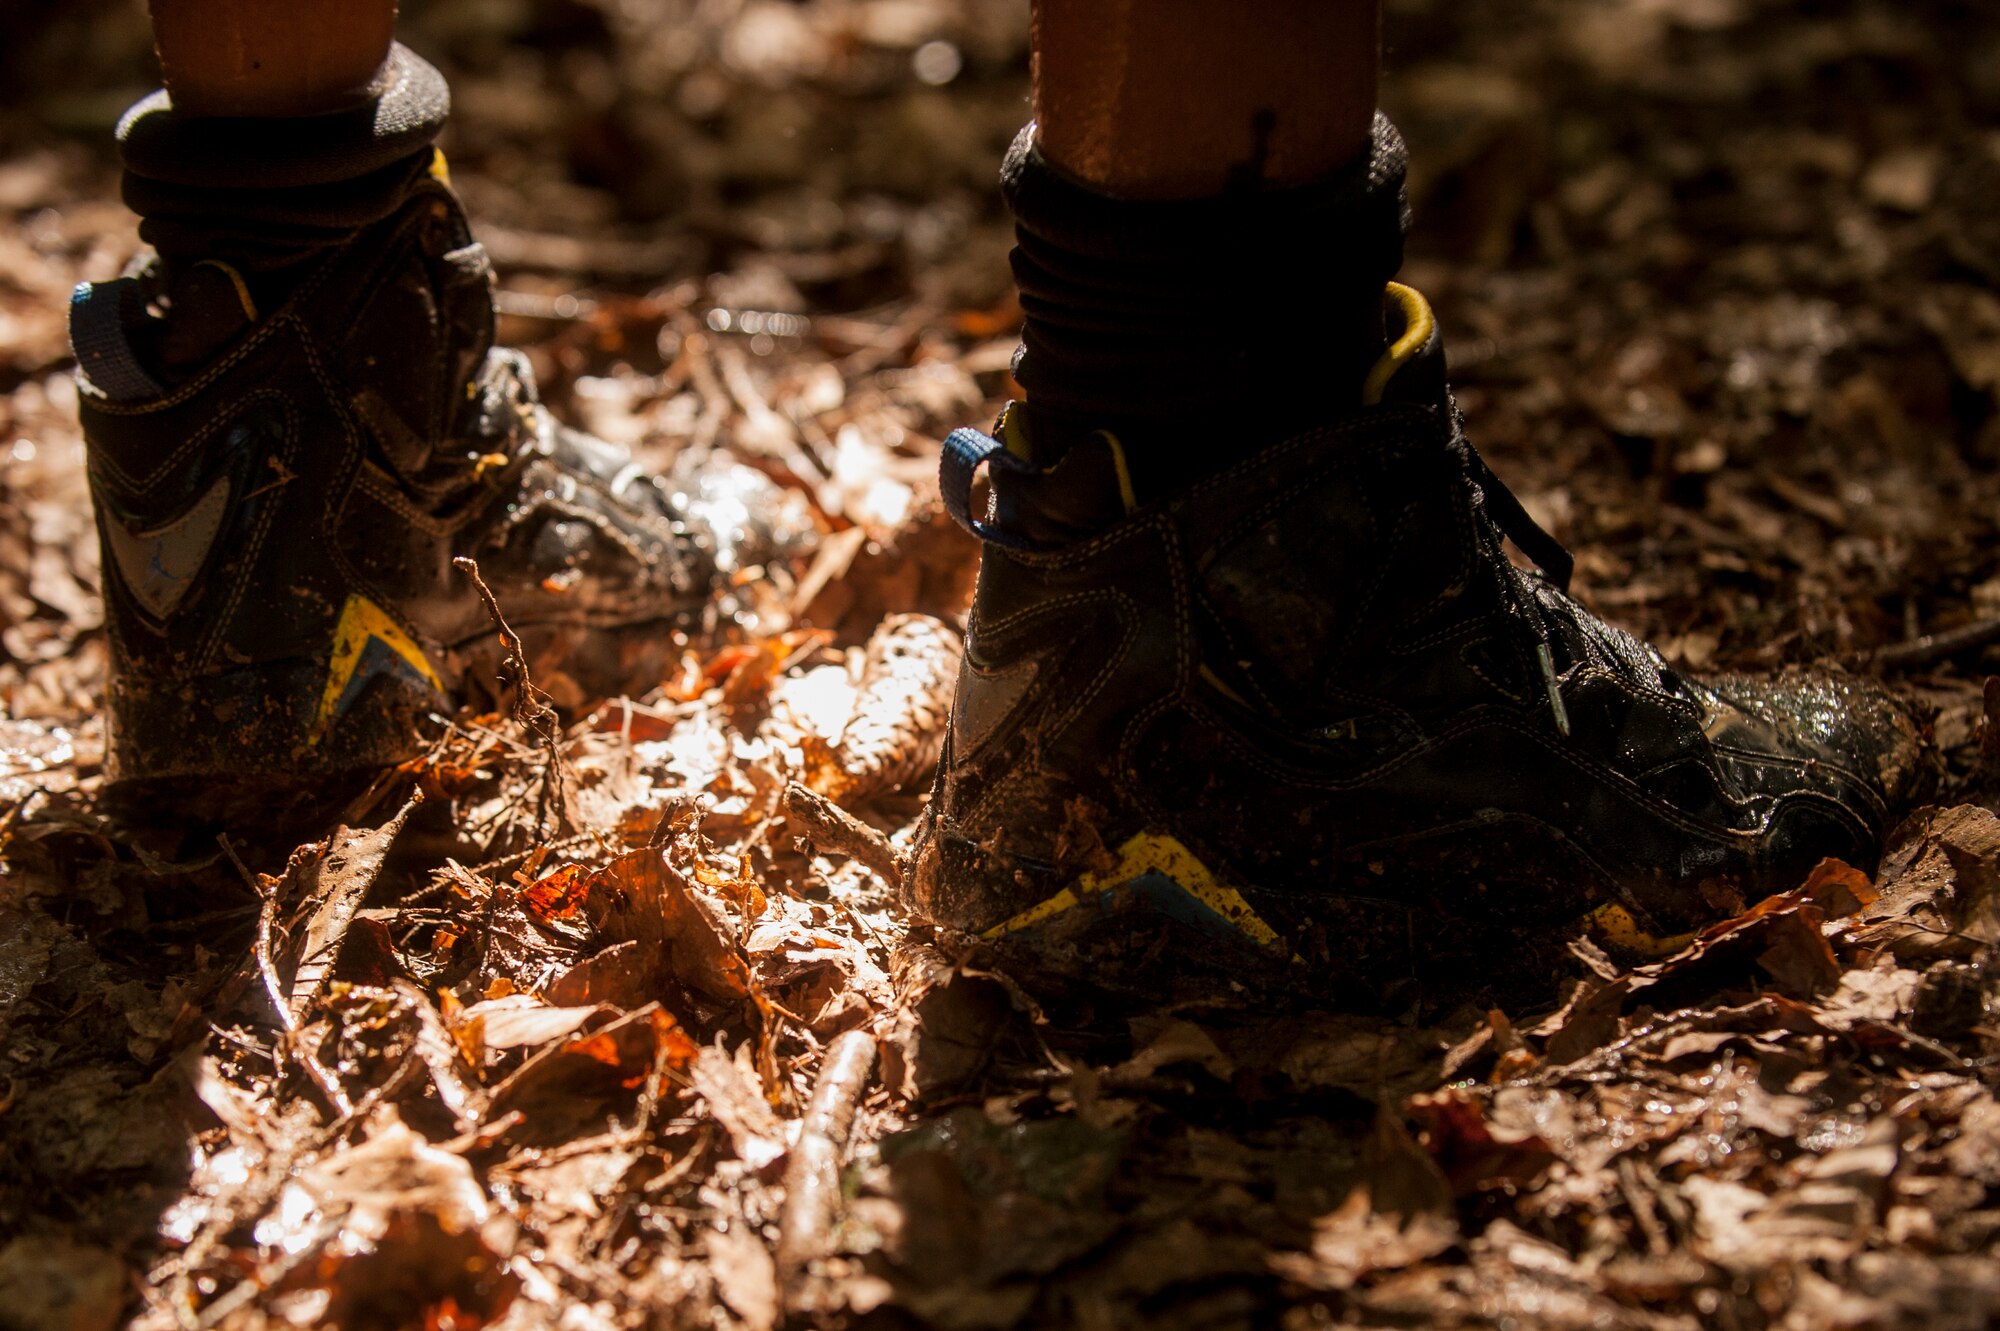 A base Airman’s shoes are covered in mud during the second annual Tier II 5K Mud Run Aug. 20, 2014 at Spangdahlem Air Base, Germany. The event provided a way for 52nd Fighter Wing Airmen to enjoy some camaraderie while also getting down and dirty. (U.S. Air Force photo by Senior Airman Rusty Frank/Released)